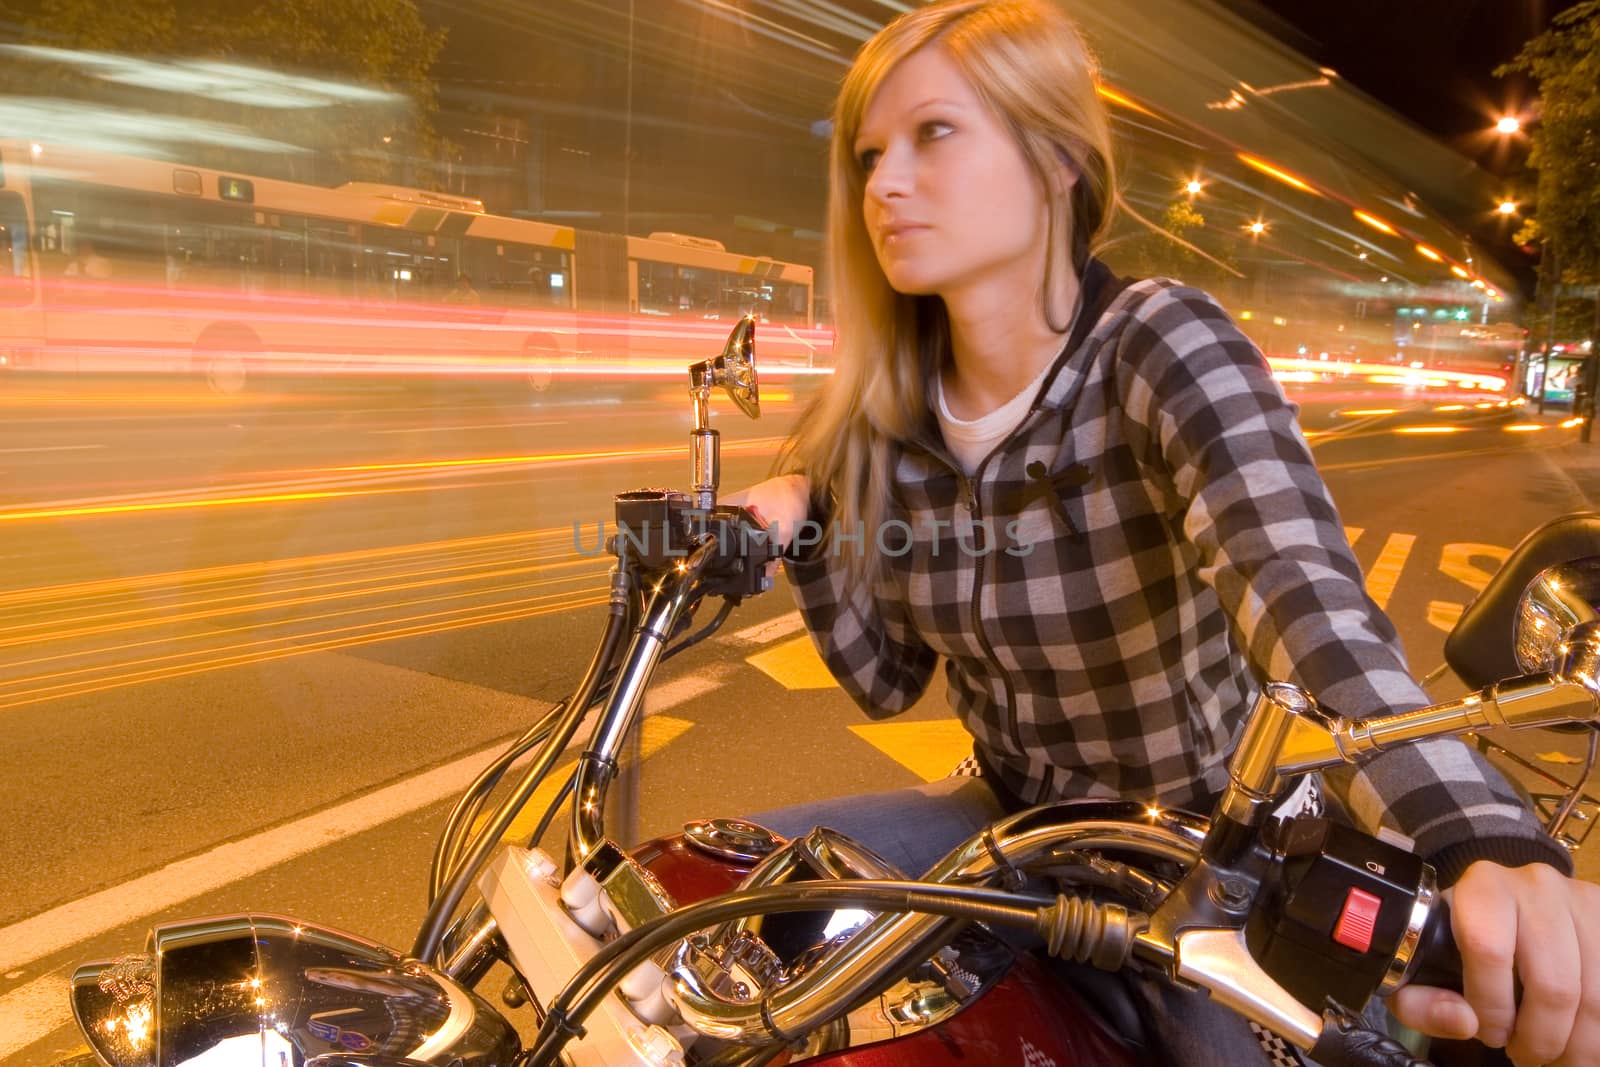 Beautiful girl on a motorcycle in a city (long exposure)